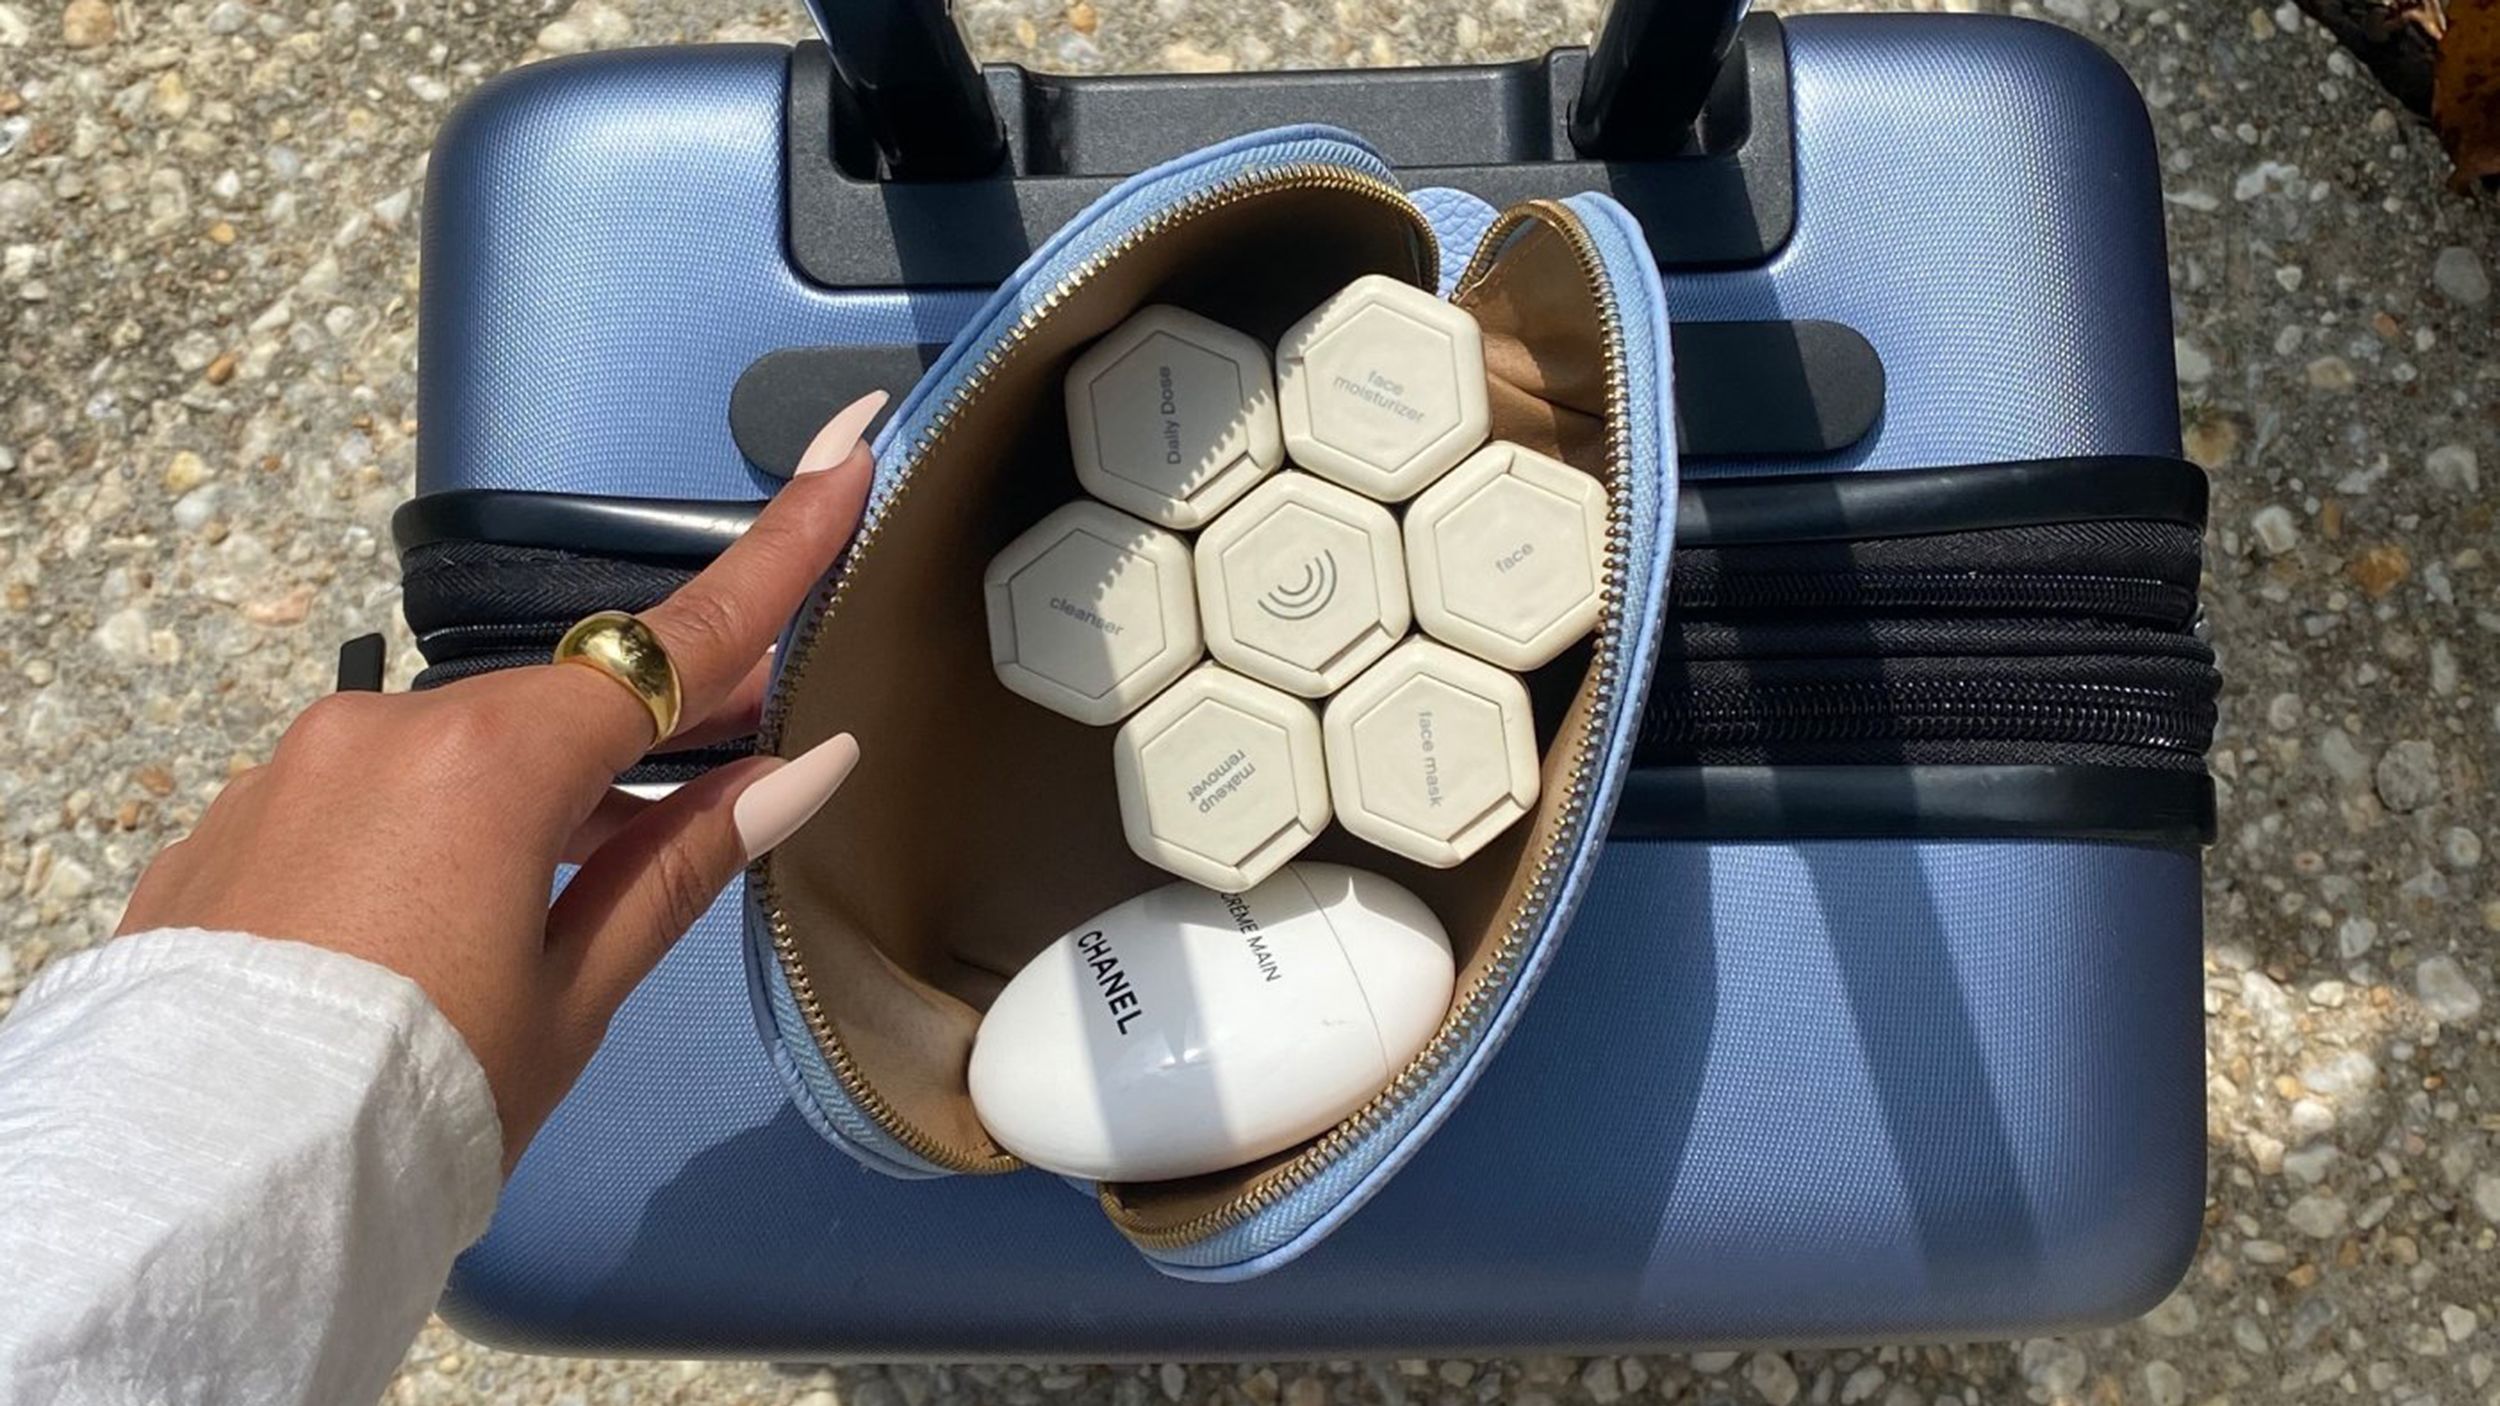 23 Products For Anyone Who Doesn't Like Carrying A Purse